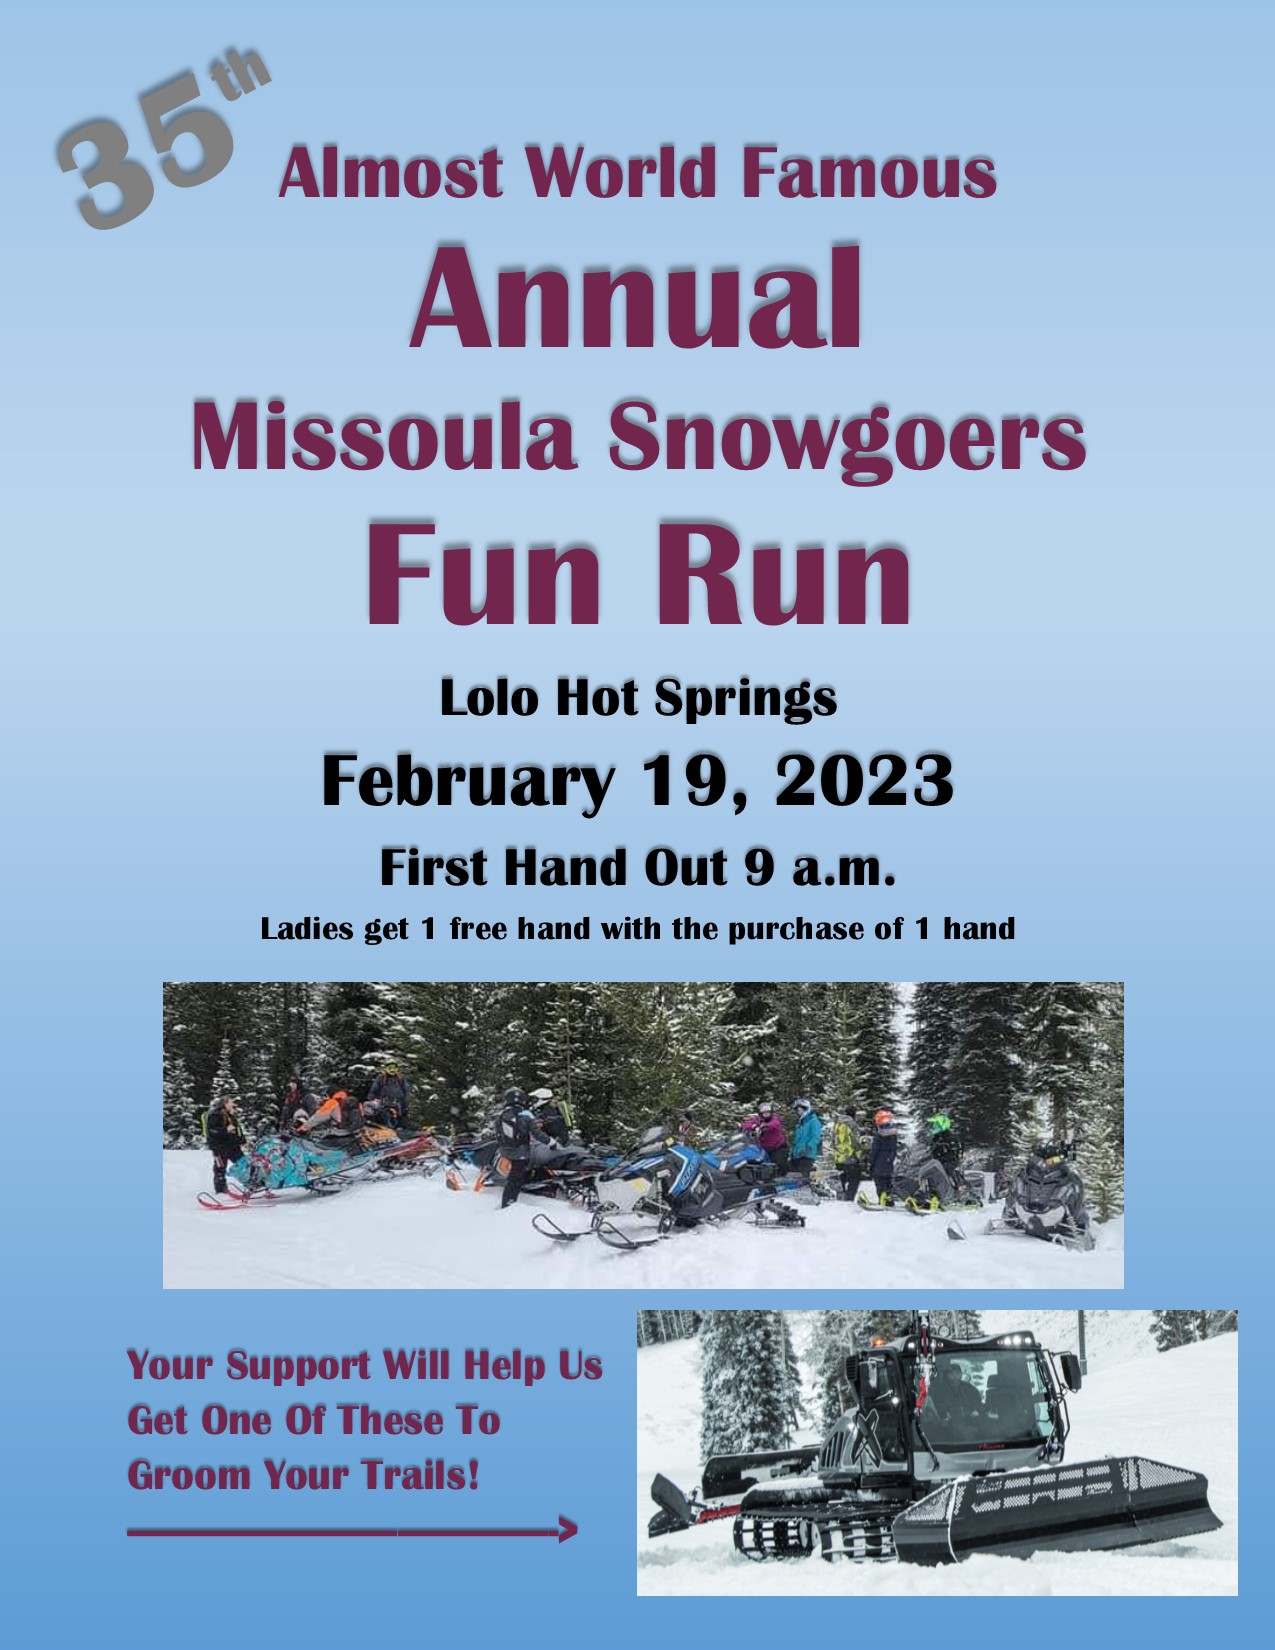 35th Annual Almost Famous Missoula Snowgoers Fun Run at Lolo Hot Springs on February 19, 2023